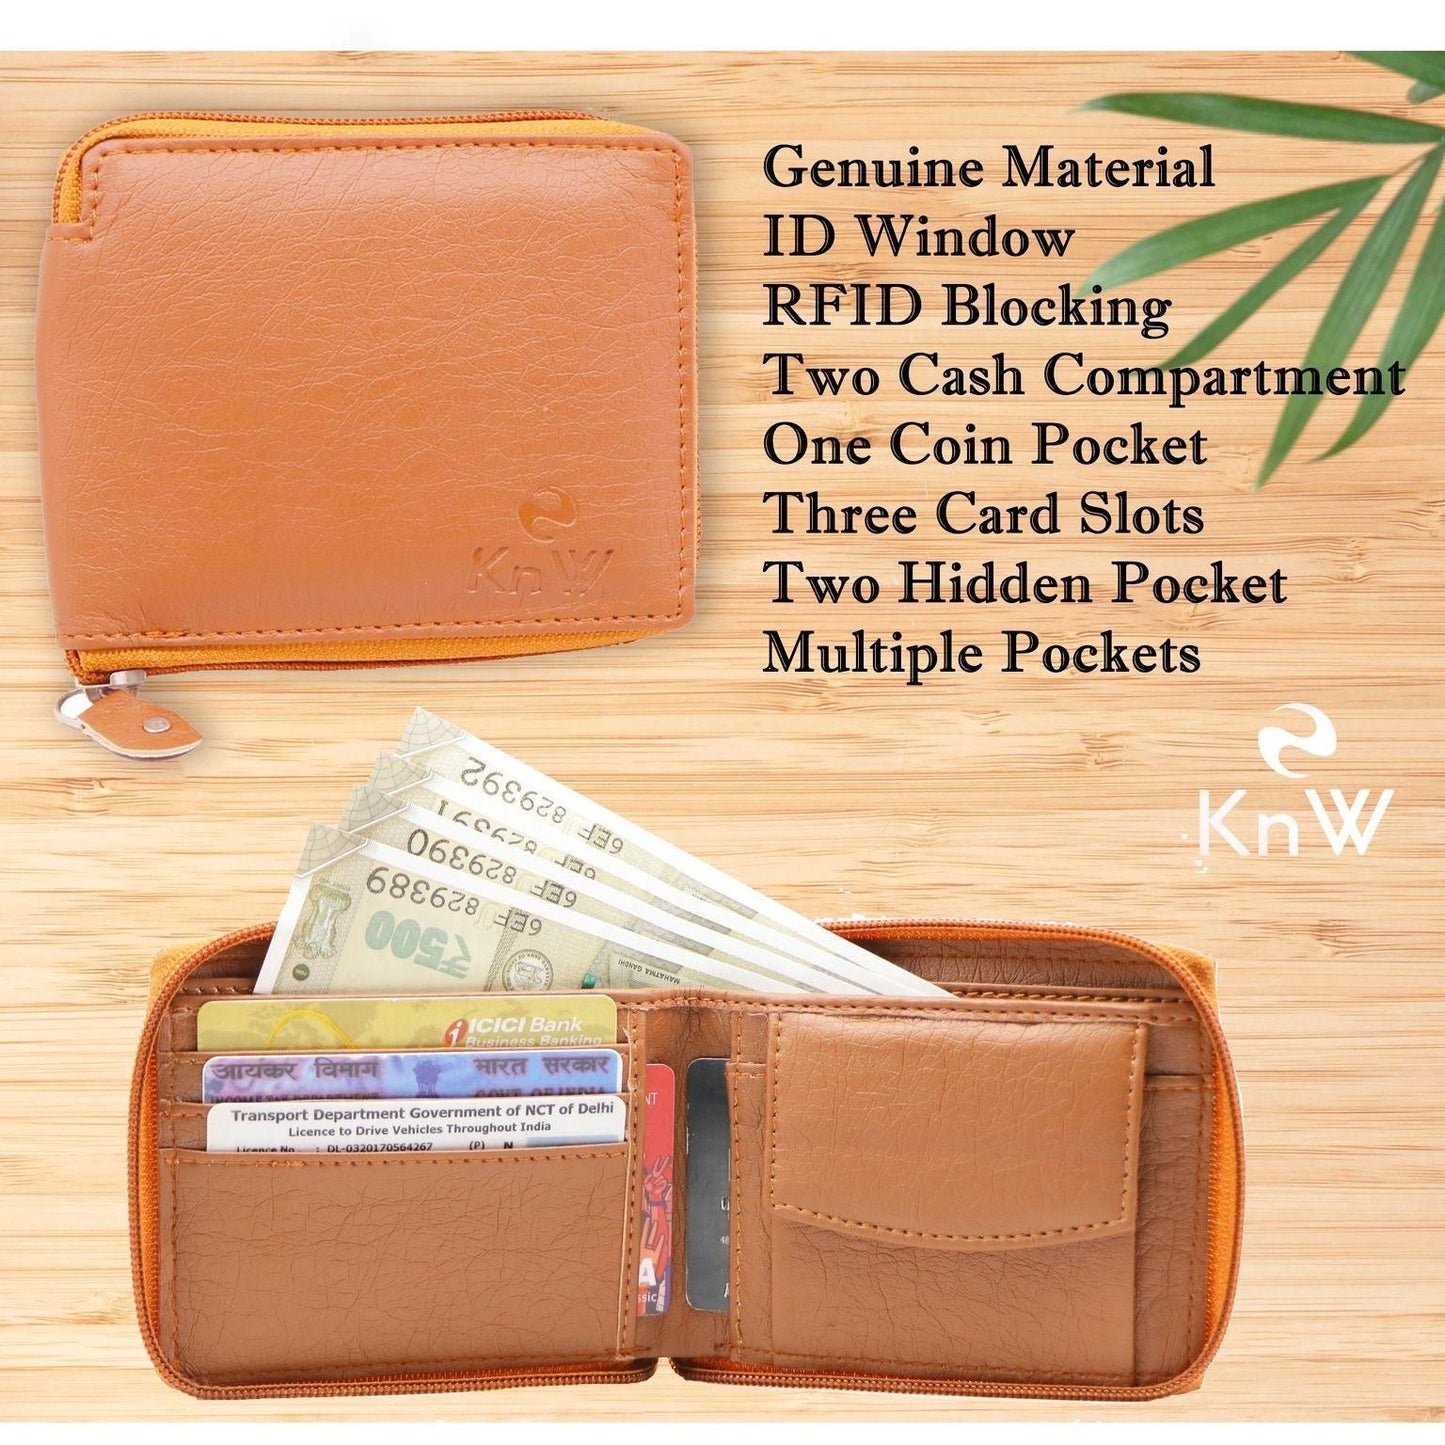 KnW Wallet Leather Green 8 Card Holder